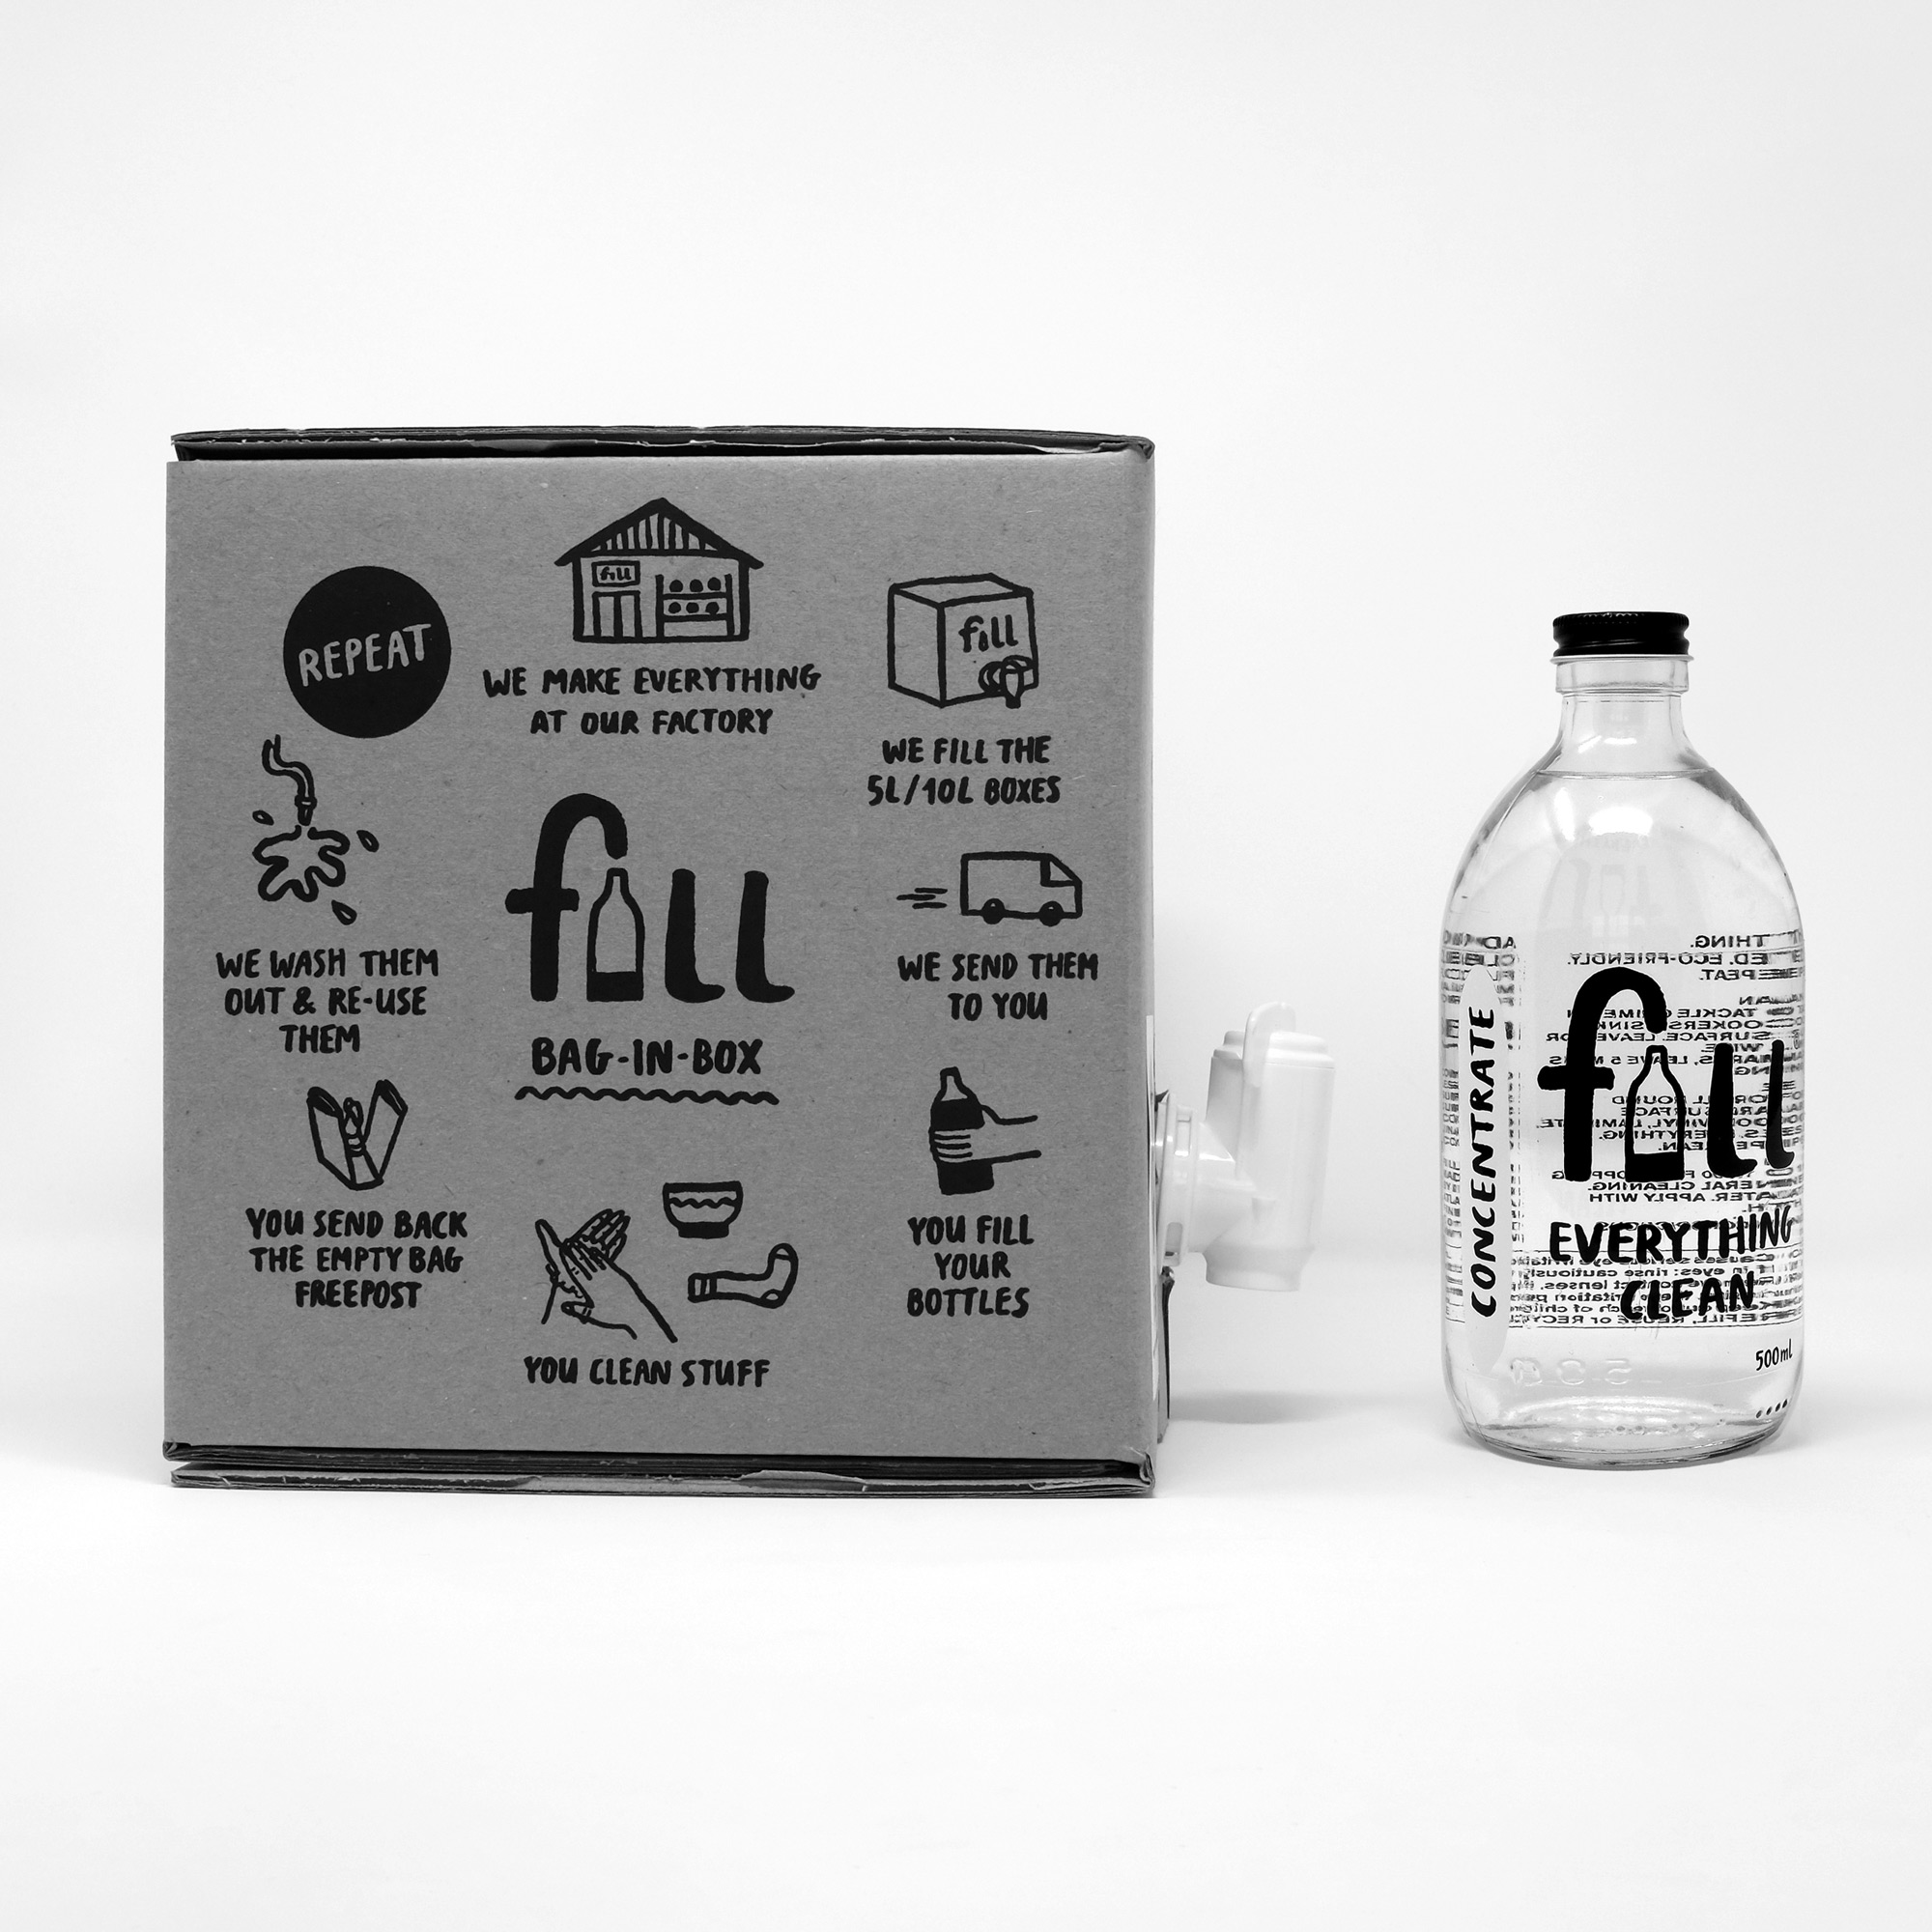 Fill - Refillable Laundry Products and Eco Cleaning Products